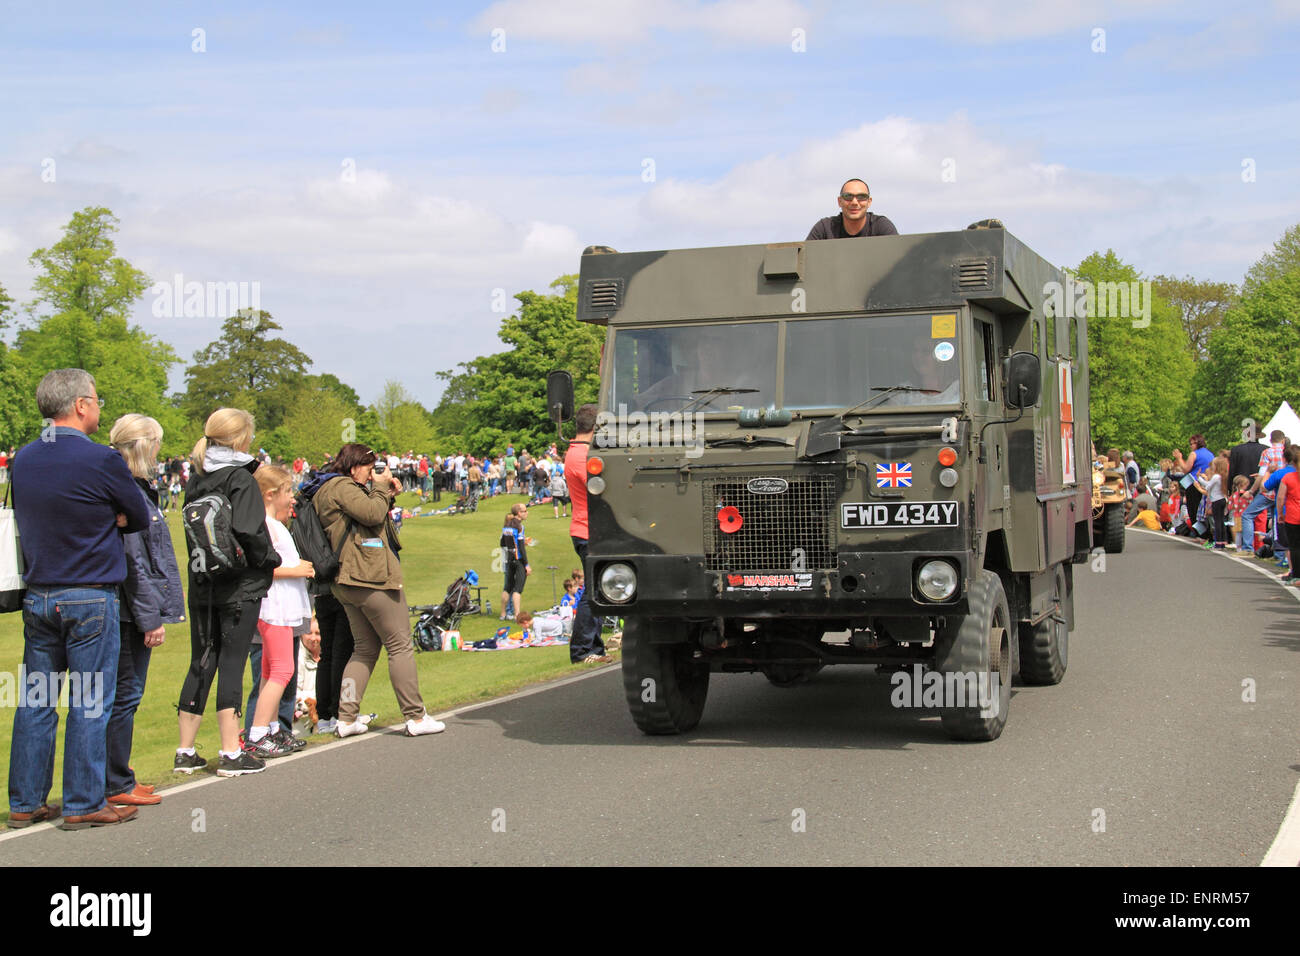 British Army Land Rover 101 Forward Control Ambulance (1983). Chestnut Sunday, 10th May 2015. Bushy Park, Hampton Court, London Borough of Richmond, England, Great Britain, United Kingdom, UK, Europe. Vintage and classic vehicle parade and displays with fairground attractions and military reenactments. Credit:  Ian Bottle / Alamy Live News Stock Photo